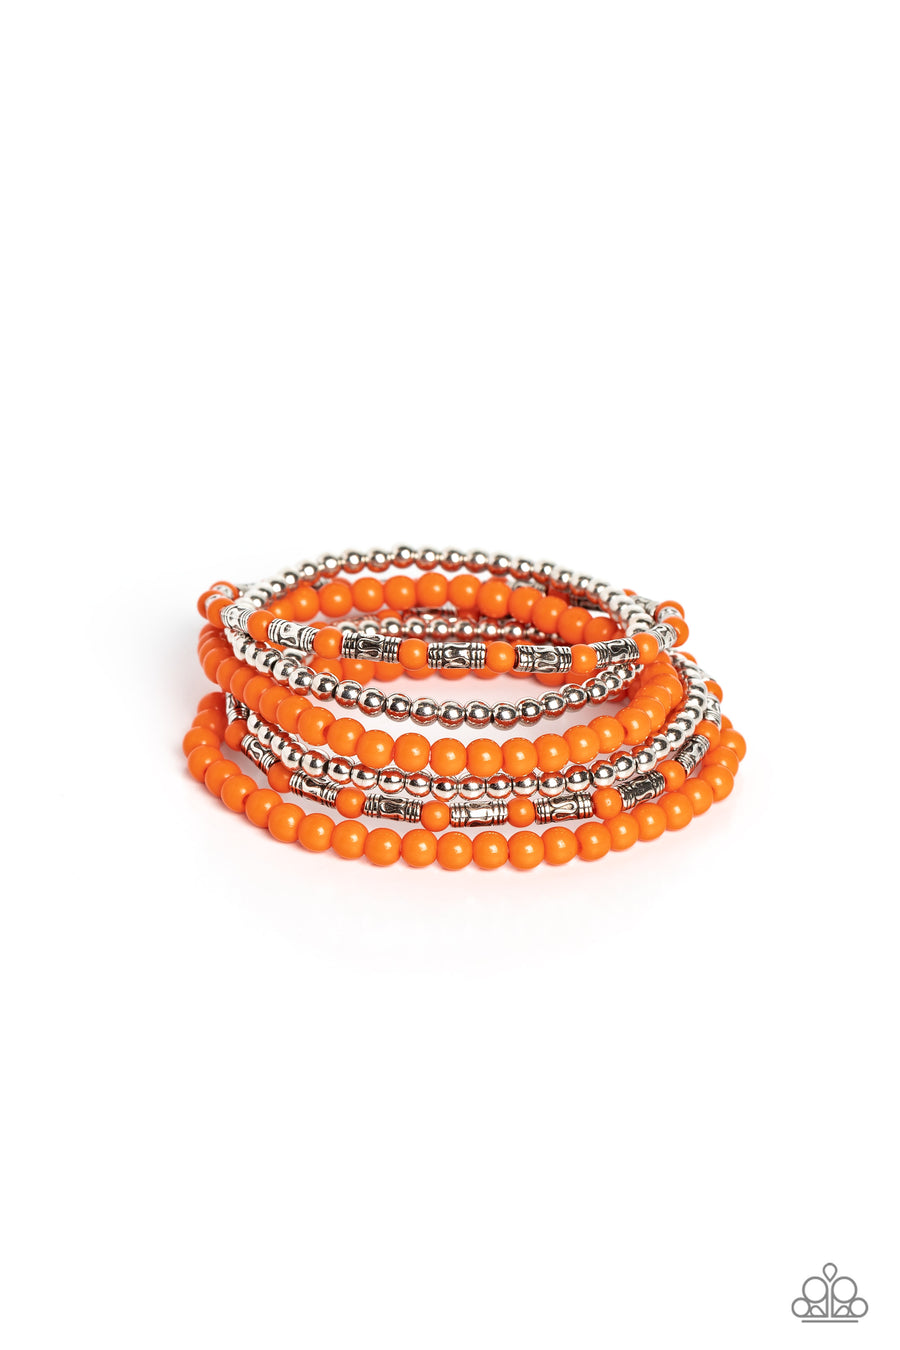 Mythical Magic - Orange Bracelet - Paparazzi Accessories - A trendy collection of orange, silver and silver cylindrical textured beads wrap around the wrist on elastic stretchy bands for a colorful, seasonal stack. Sold as one set of six bracelets.